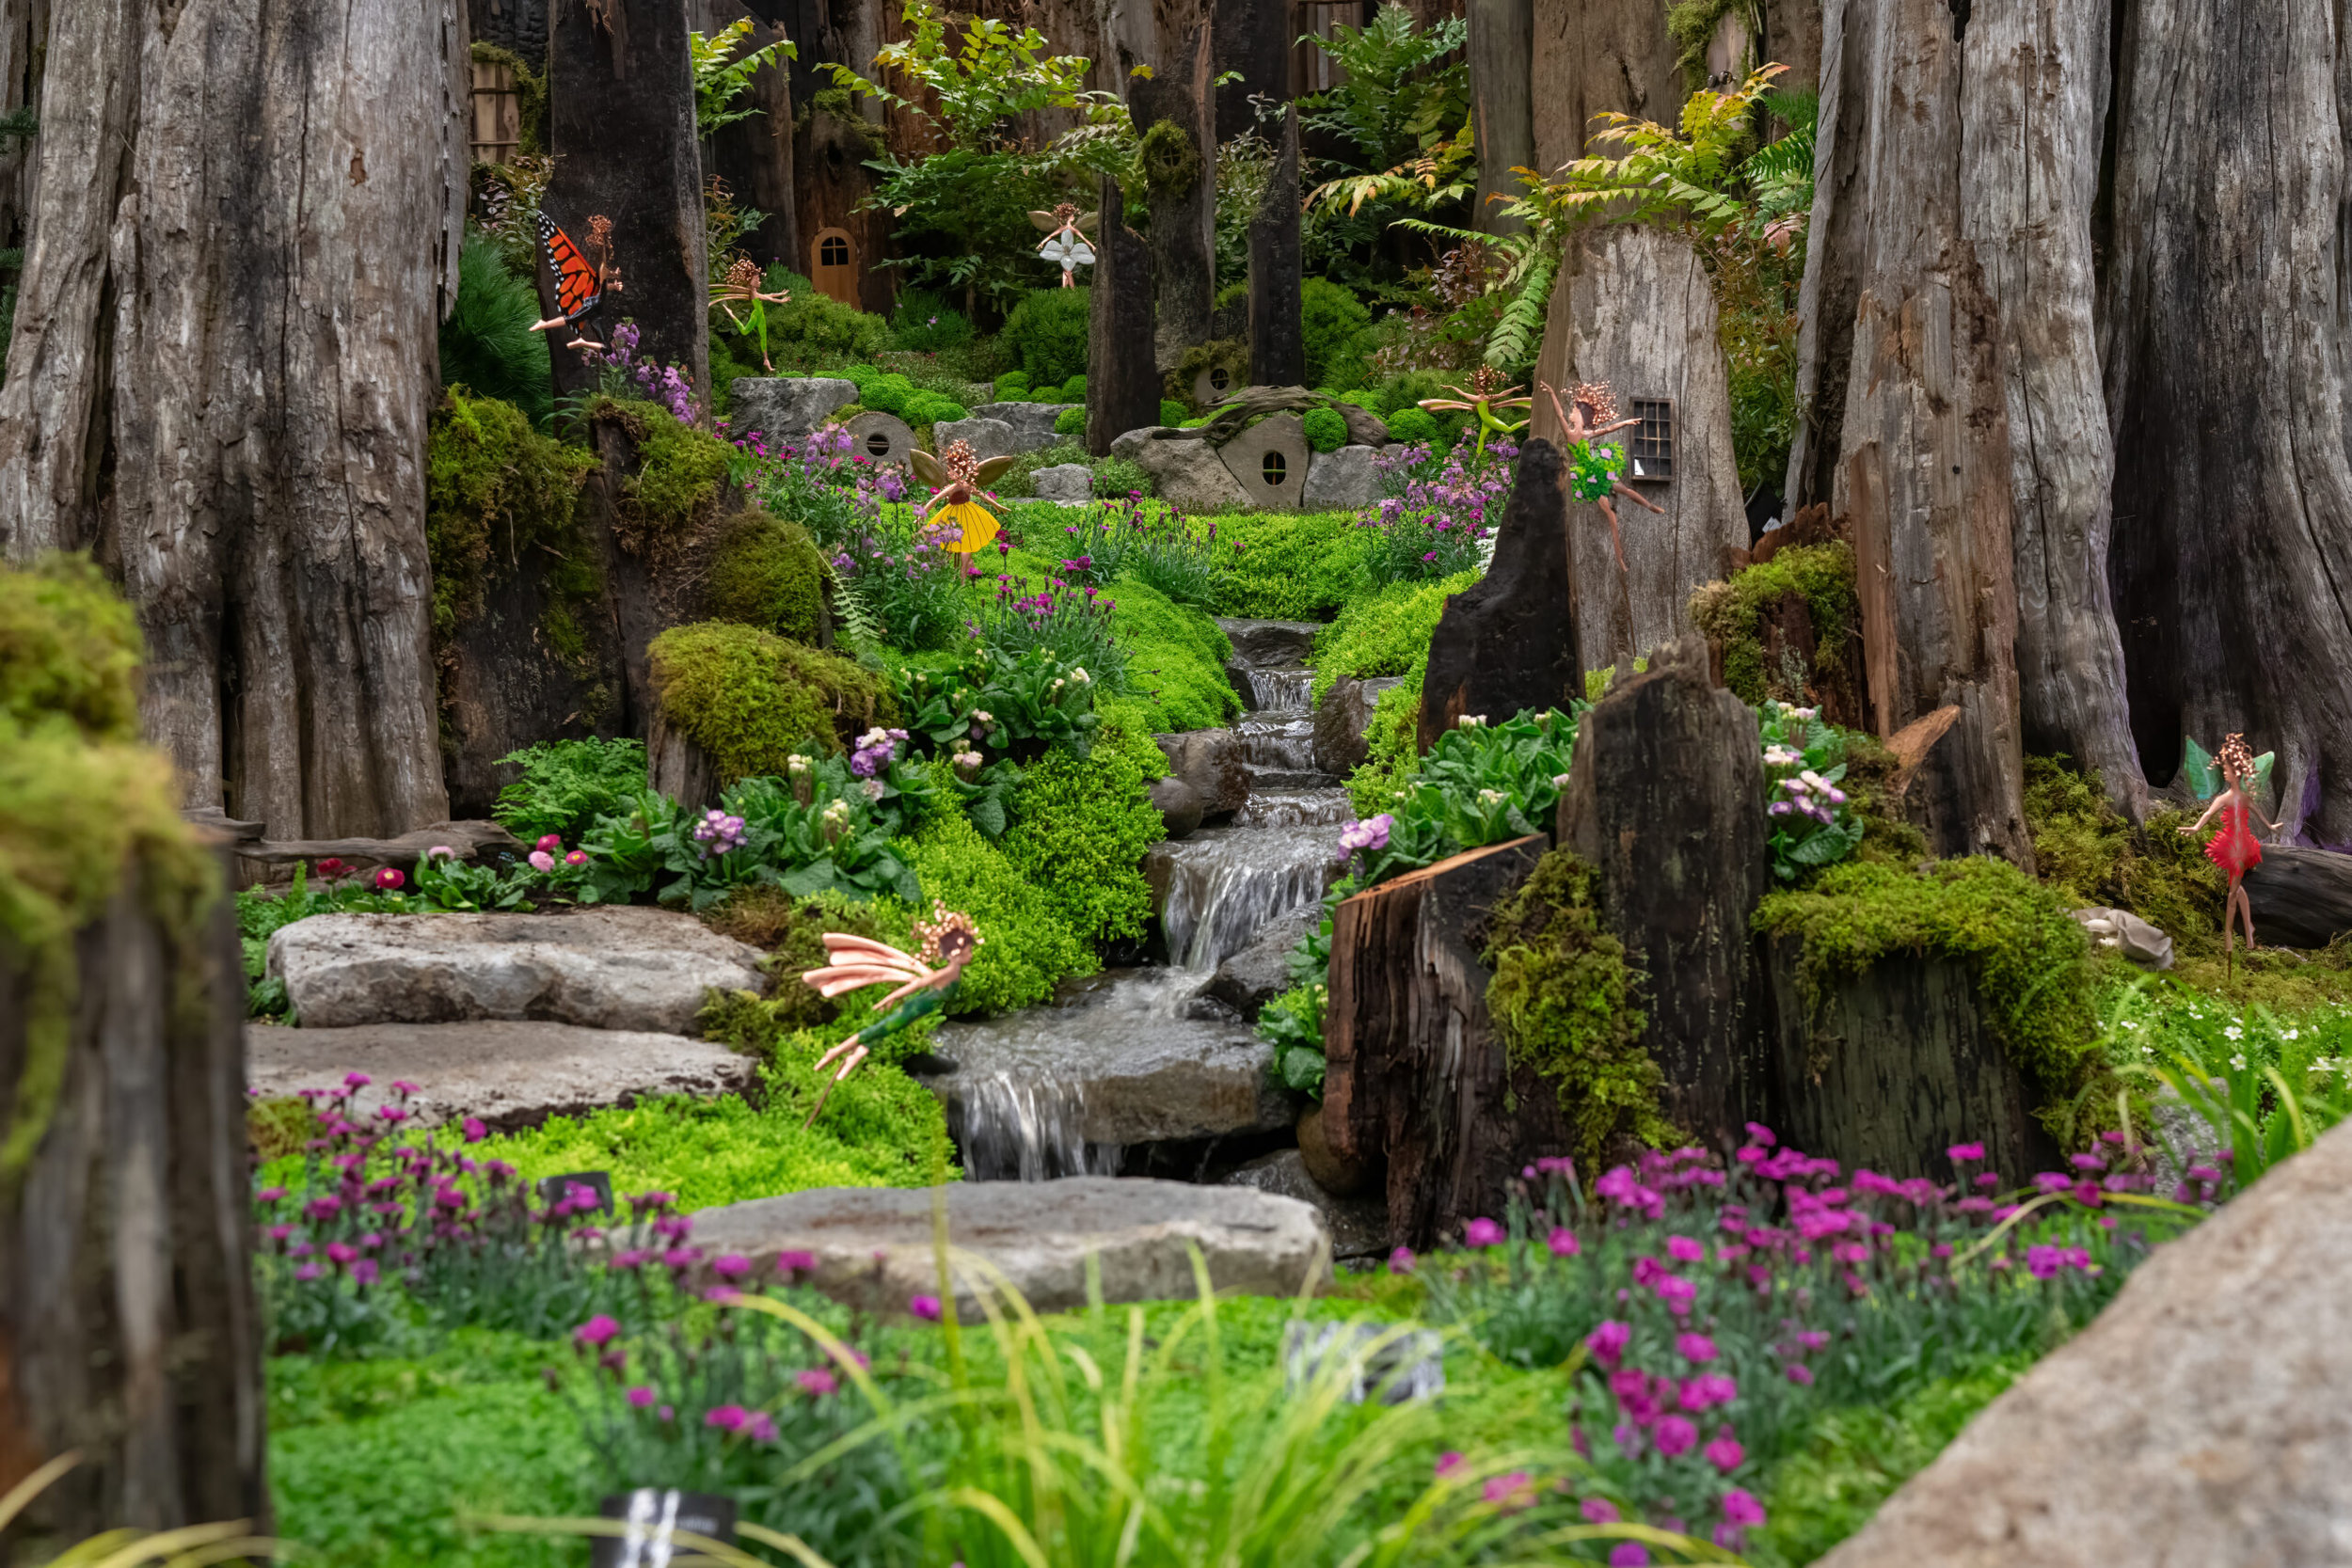 Events, Fairy Doors, Hobbit, King County, King County Events, Northwest Flower and Garden Festival, Seattle, Seattle events, Secret Garden, garden, garden shows, home shows, whimsical